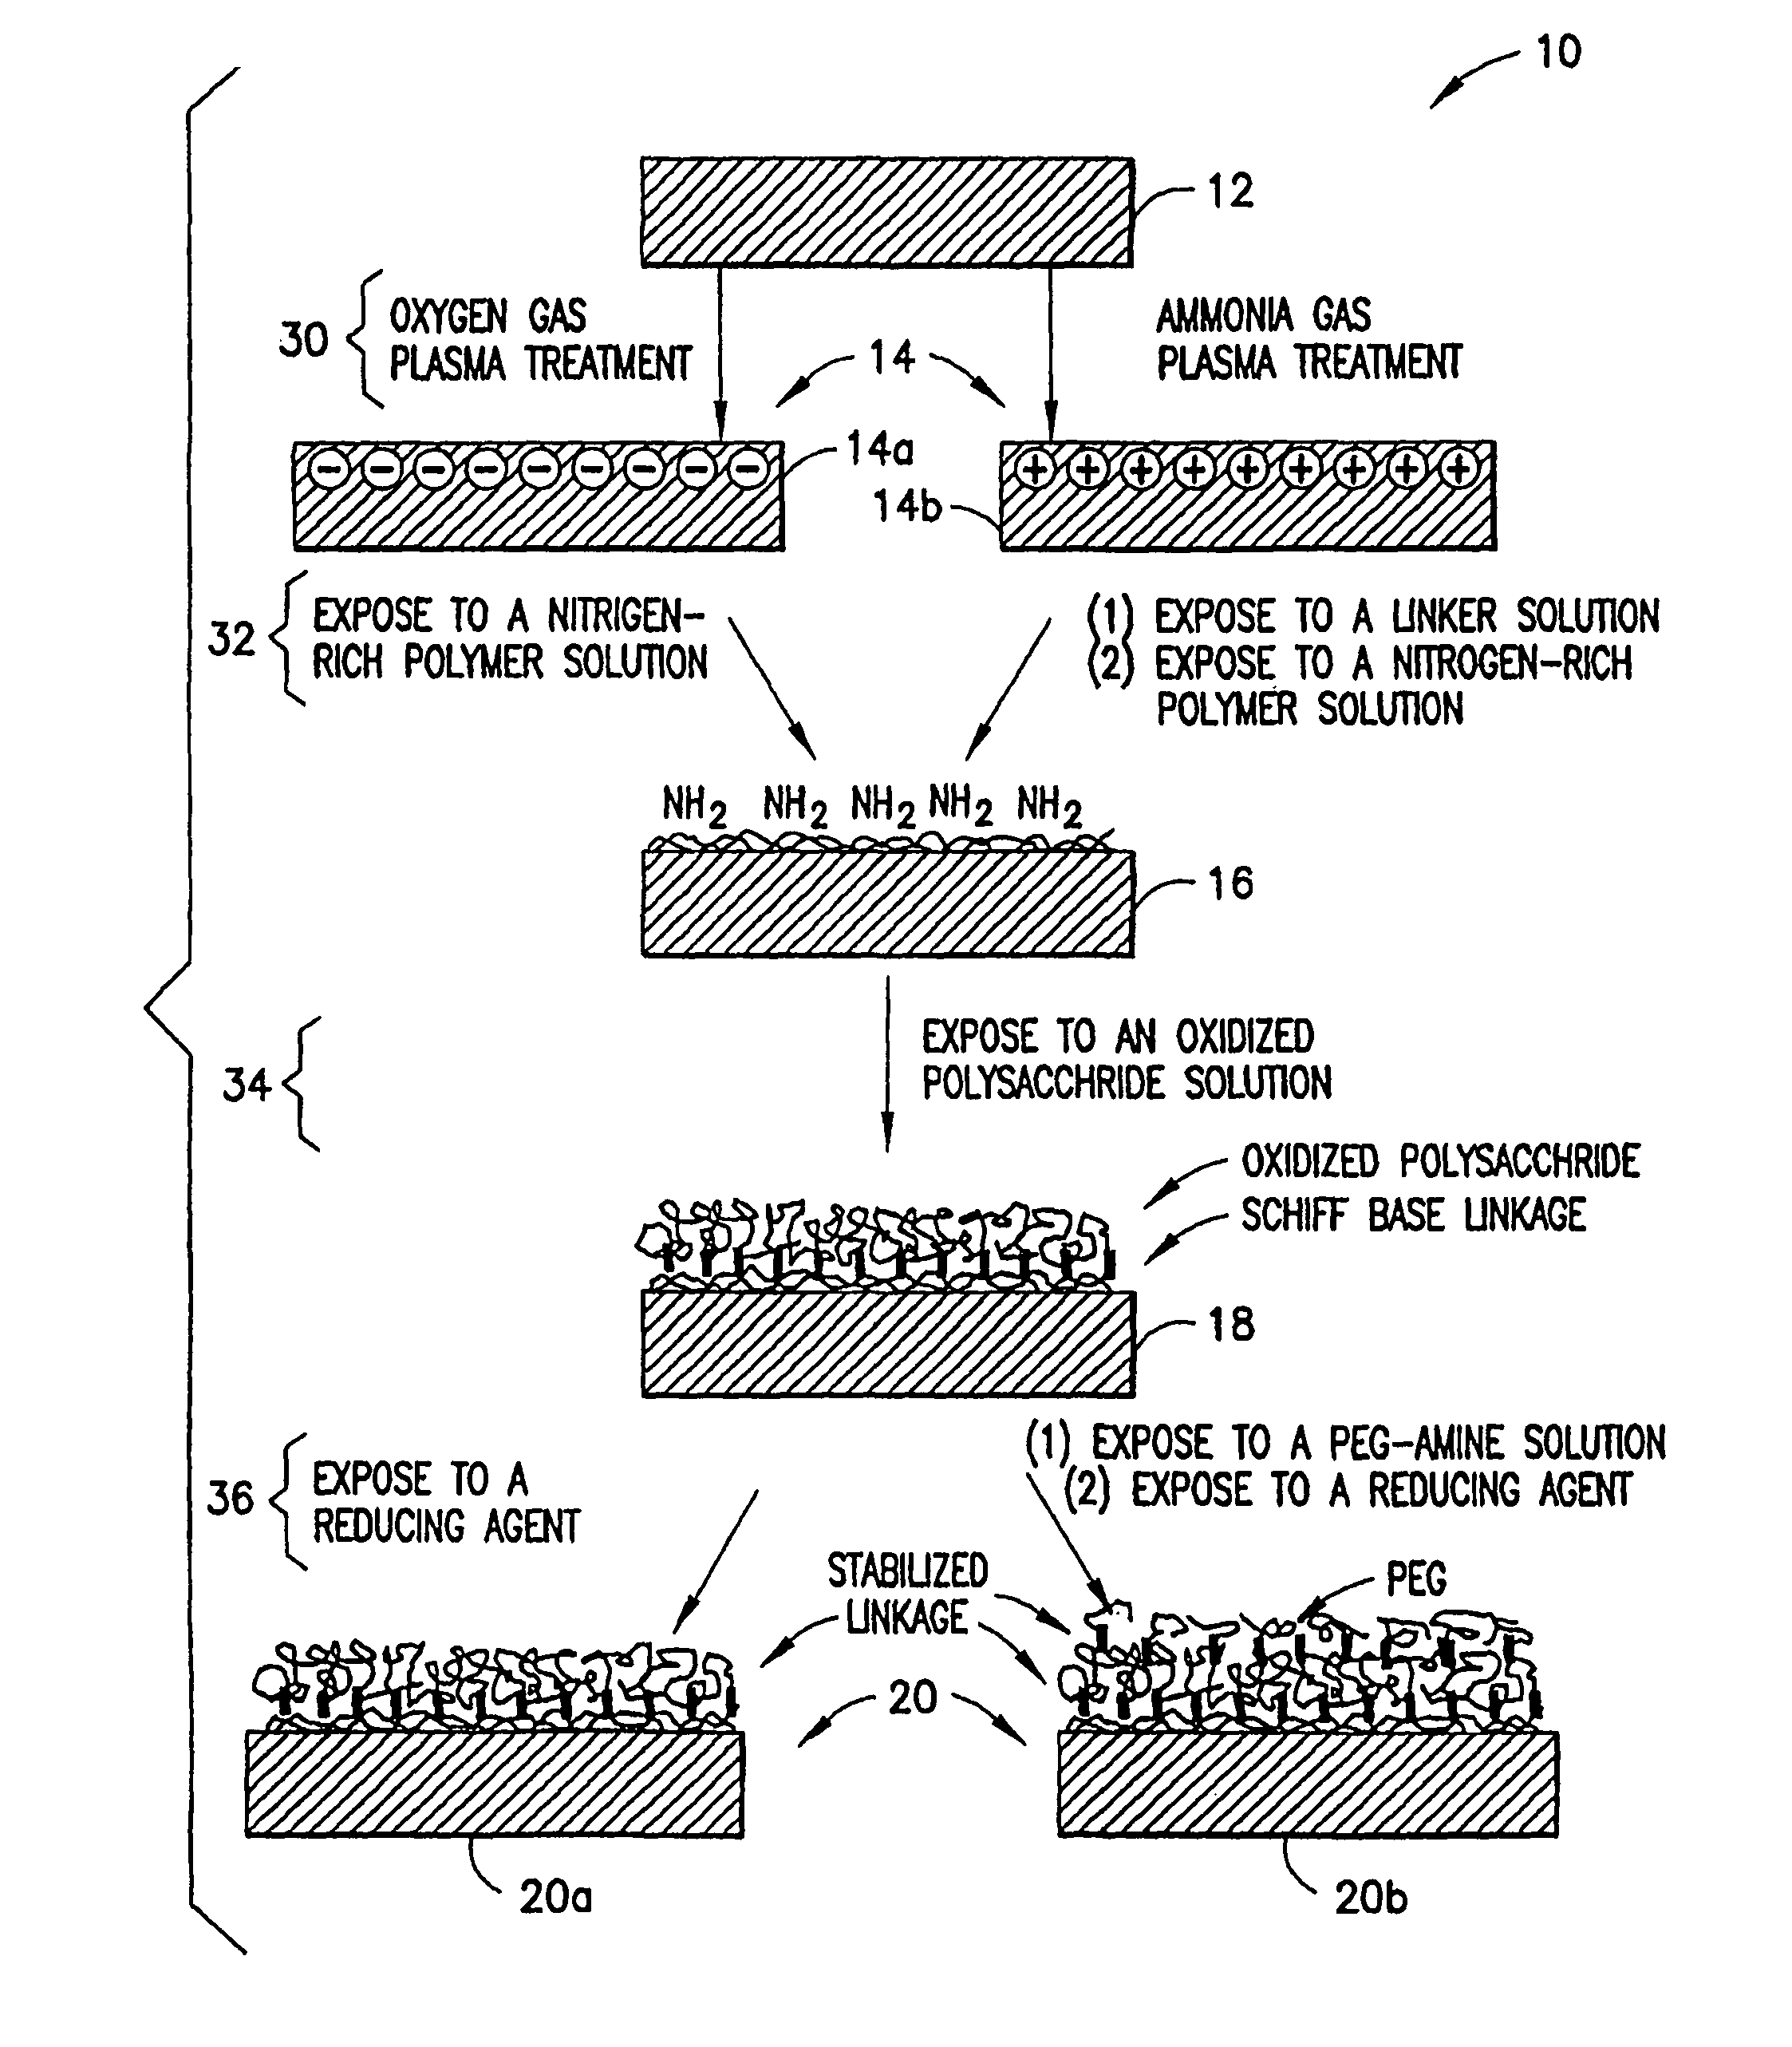 Methods for producing surfaces that resist non-specific protein binding and cell attachment